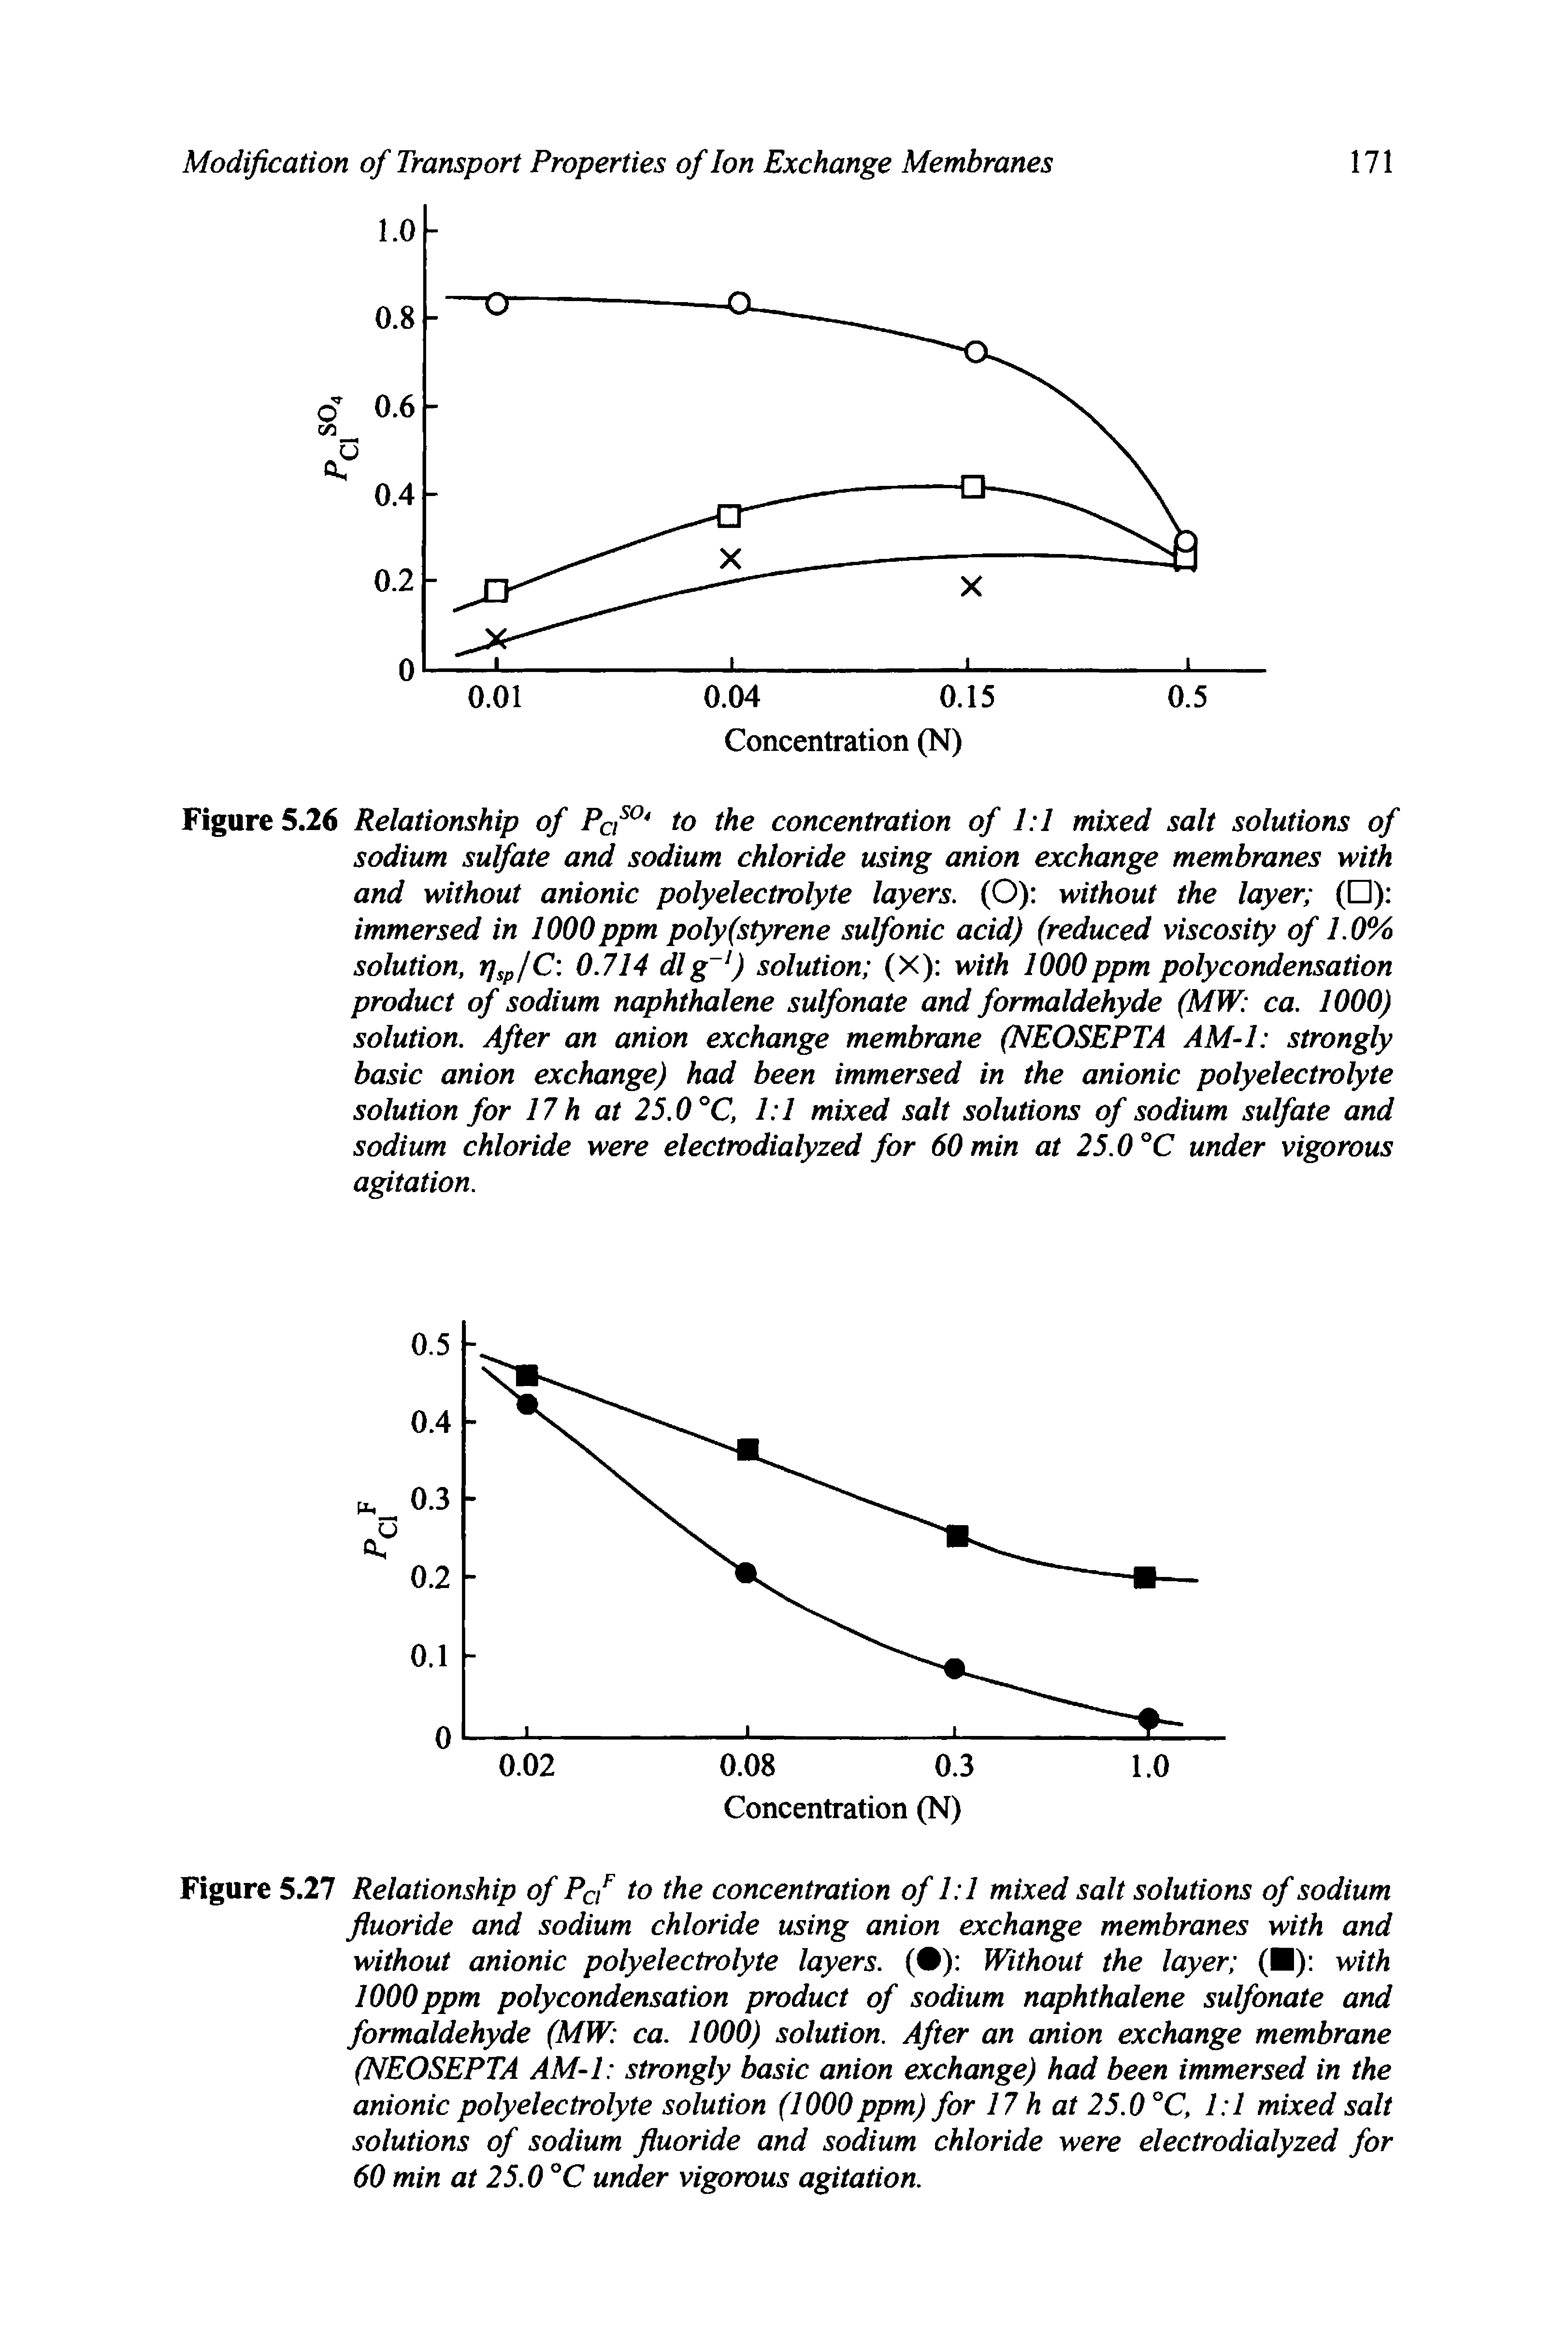 Figure 5.26 Relationship of Pa50 to the concentration of 1 1 mixed salt solutions of sodium sulfate and sodium chloride using anion exchange membranes with and without anionic polyelectrolyte layers. (O) without the layer ( ) immersed in 1000ppm poly(styrene sulfonic acid) (reduced viscosity of 1.0% solution, r sp/C 0.714 dlg ) solution (X) with 1000ppm polycondensation product of sodium naphthalene sulfonate and formaldehyde (MW ca. 1000) solution. After an anion exchange membrane (NEOSEPTA AM-1 strongly basic anion exchange) had been immersed in the anionic polyelectrolyte solution for 17 h at 25.0 °C, 1 1 mixed salt solutions of sodium sulfate and sodium chloride were electrodialyzed for 60 min at 25.0 °C under vigorous agitation.